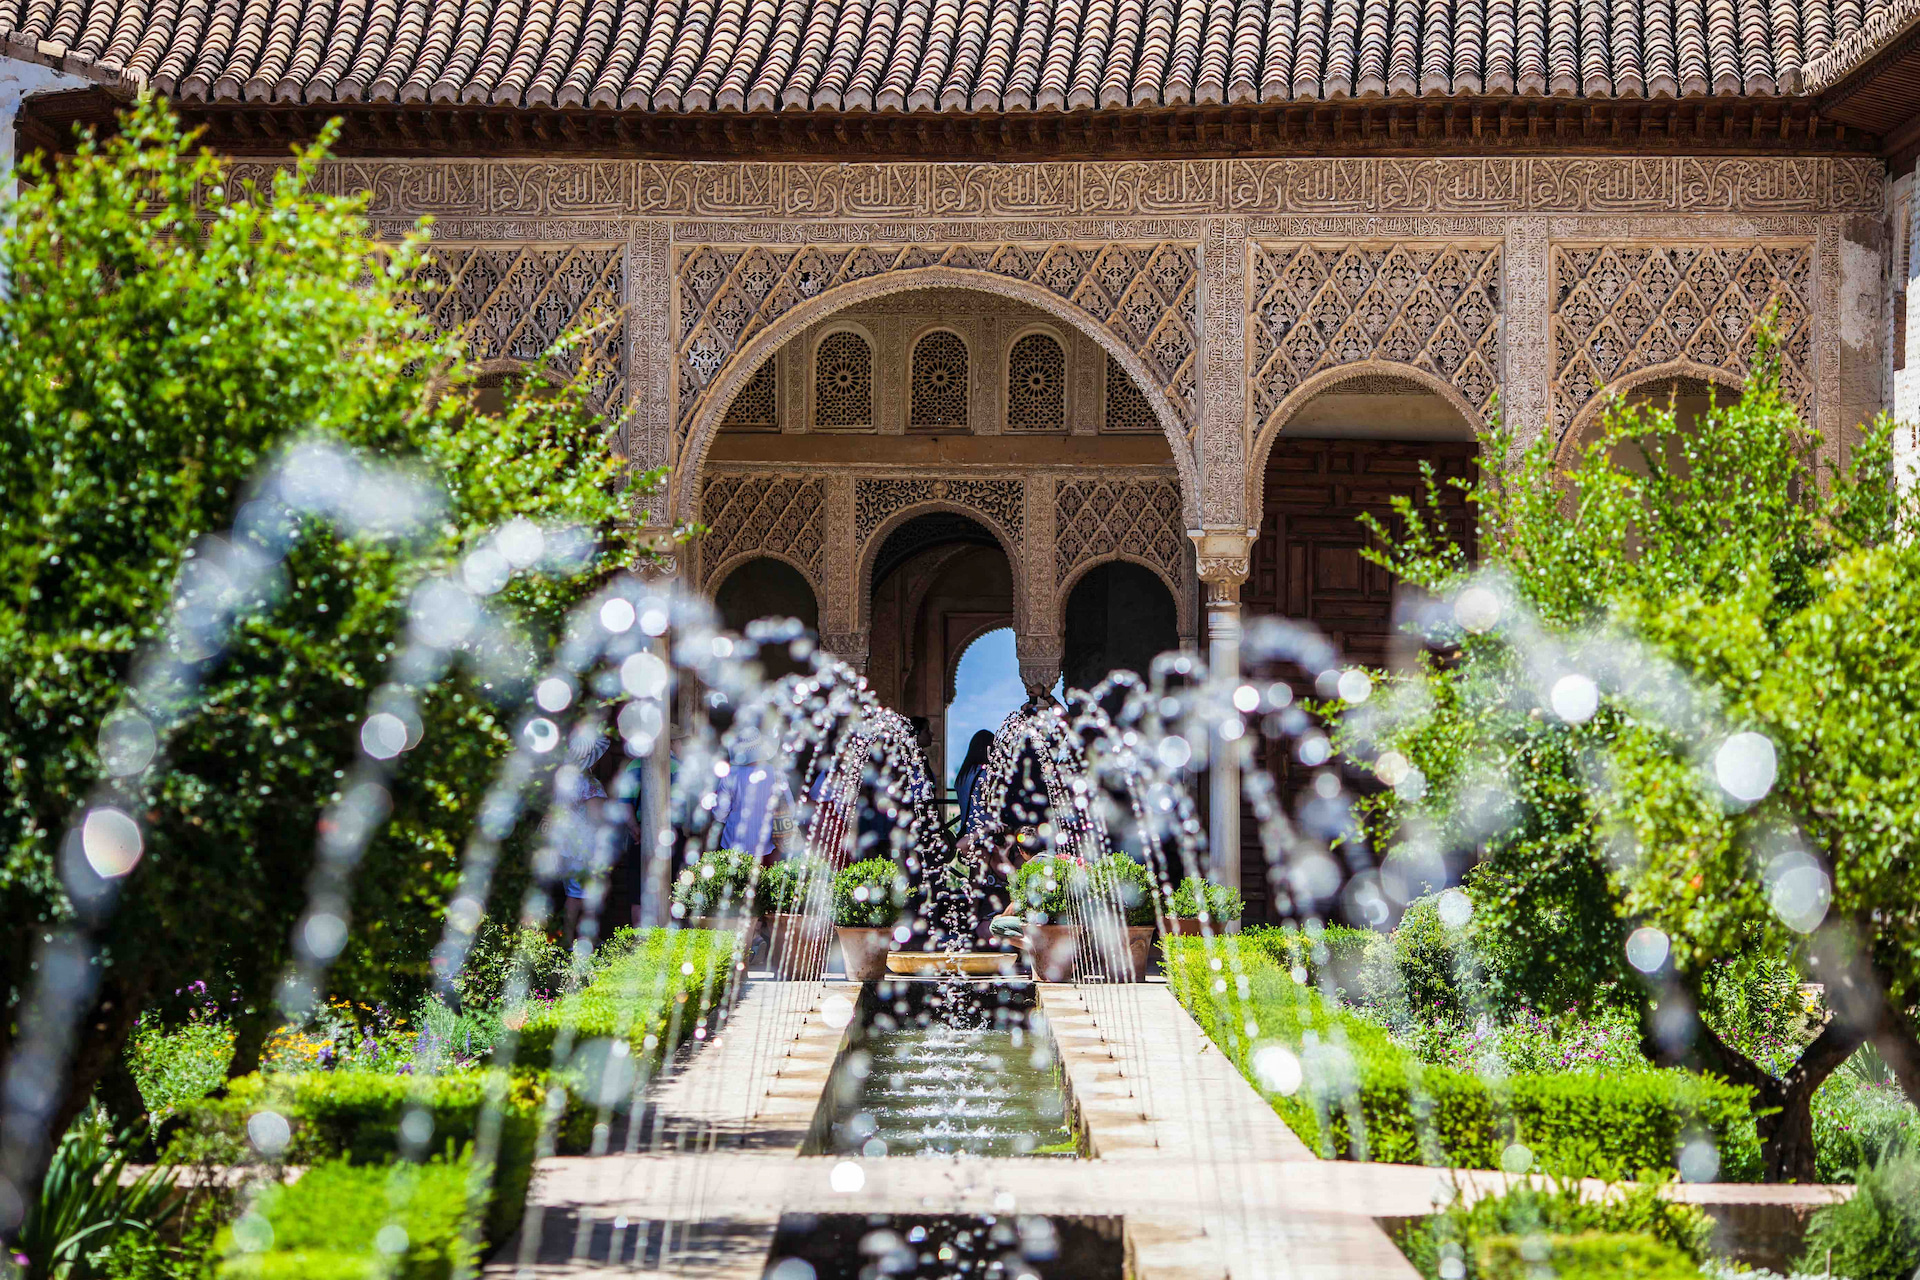 Discover the mysteries of the Alhambra in Granada